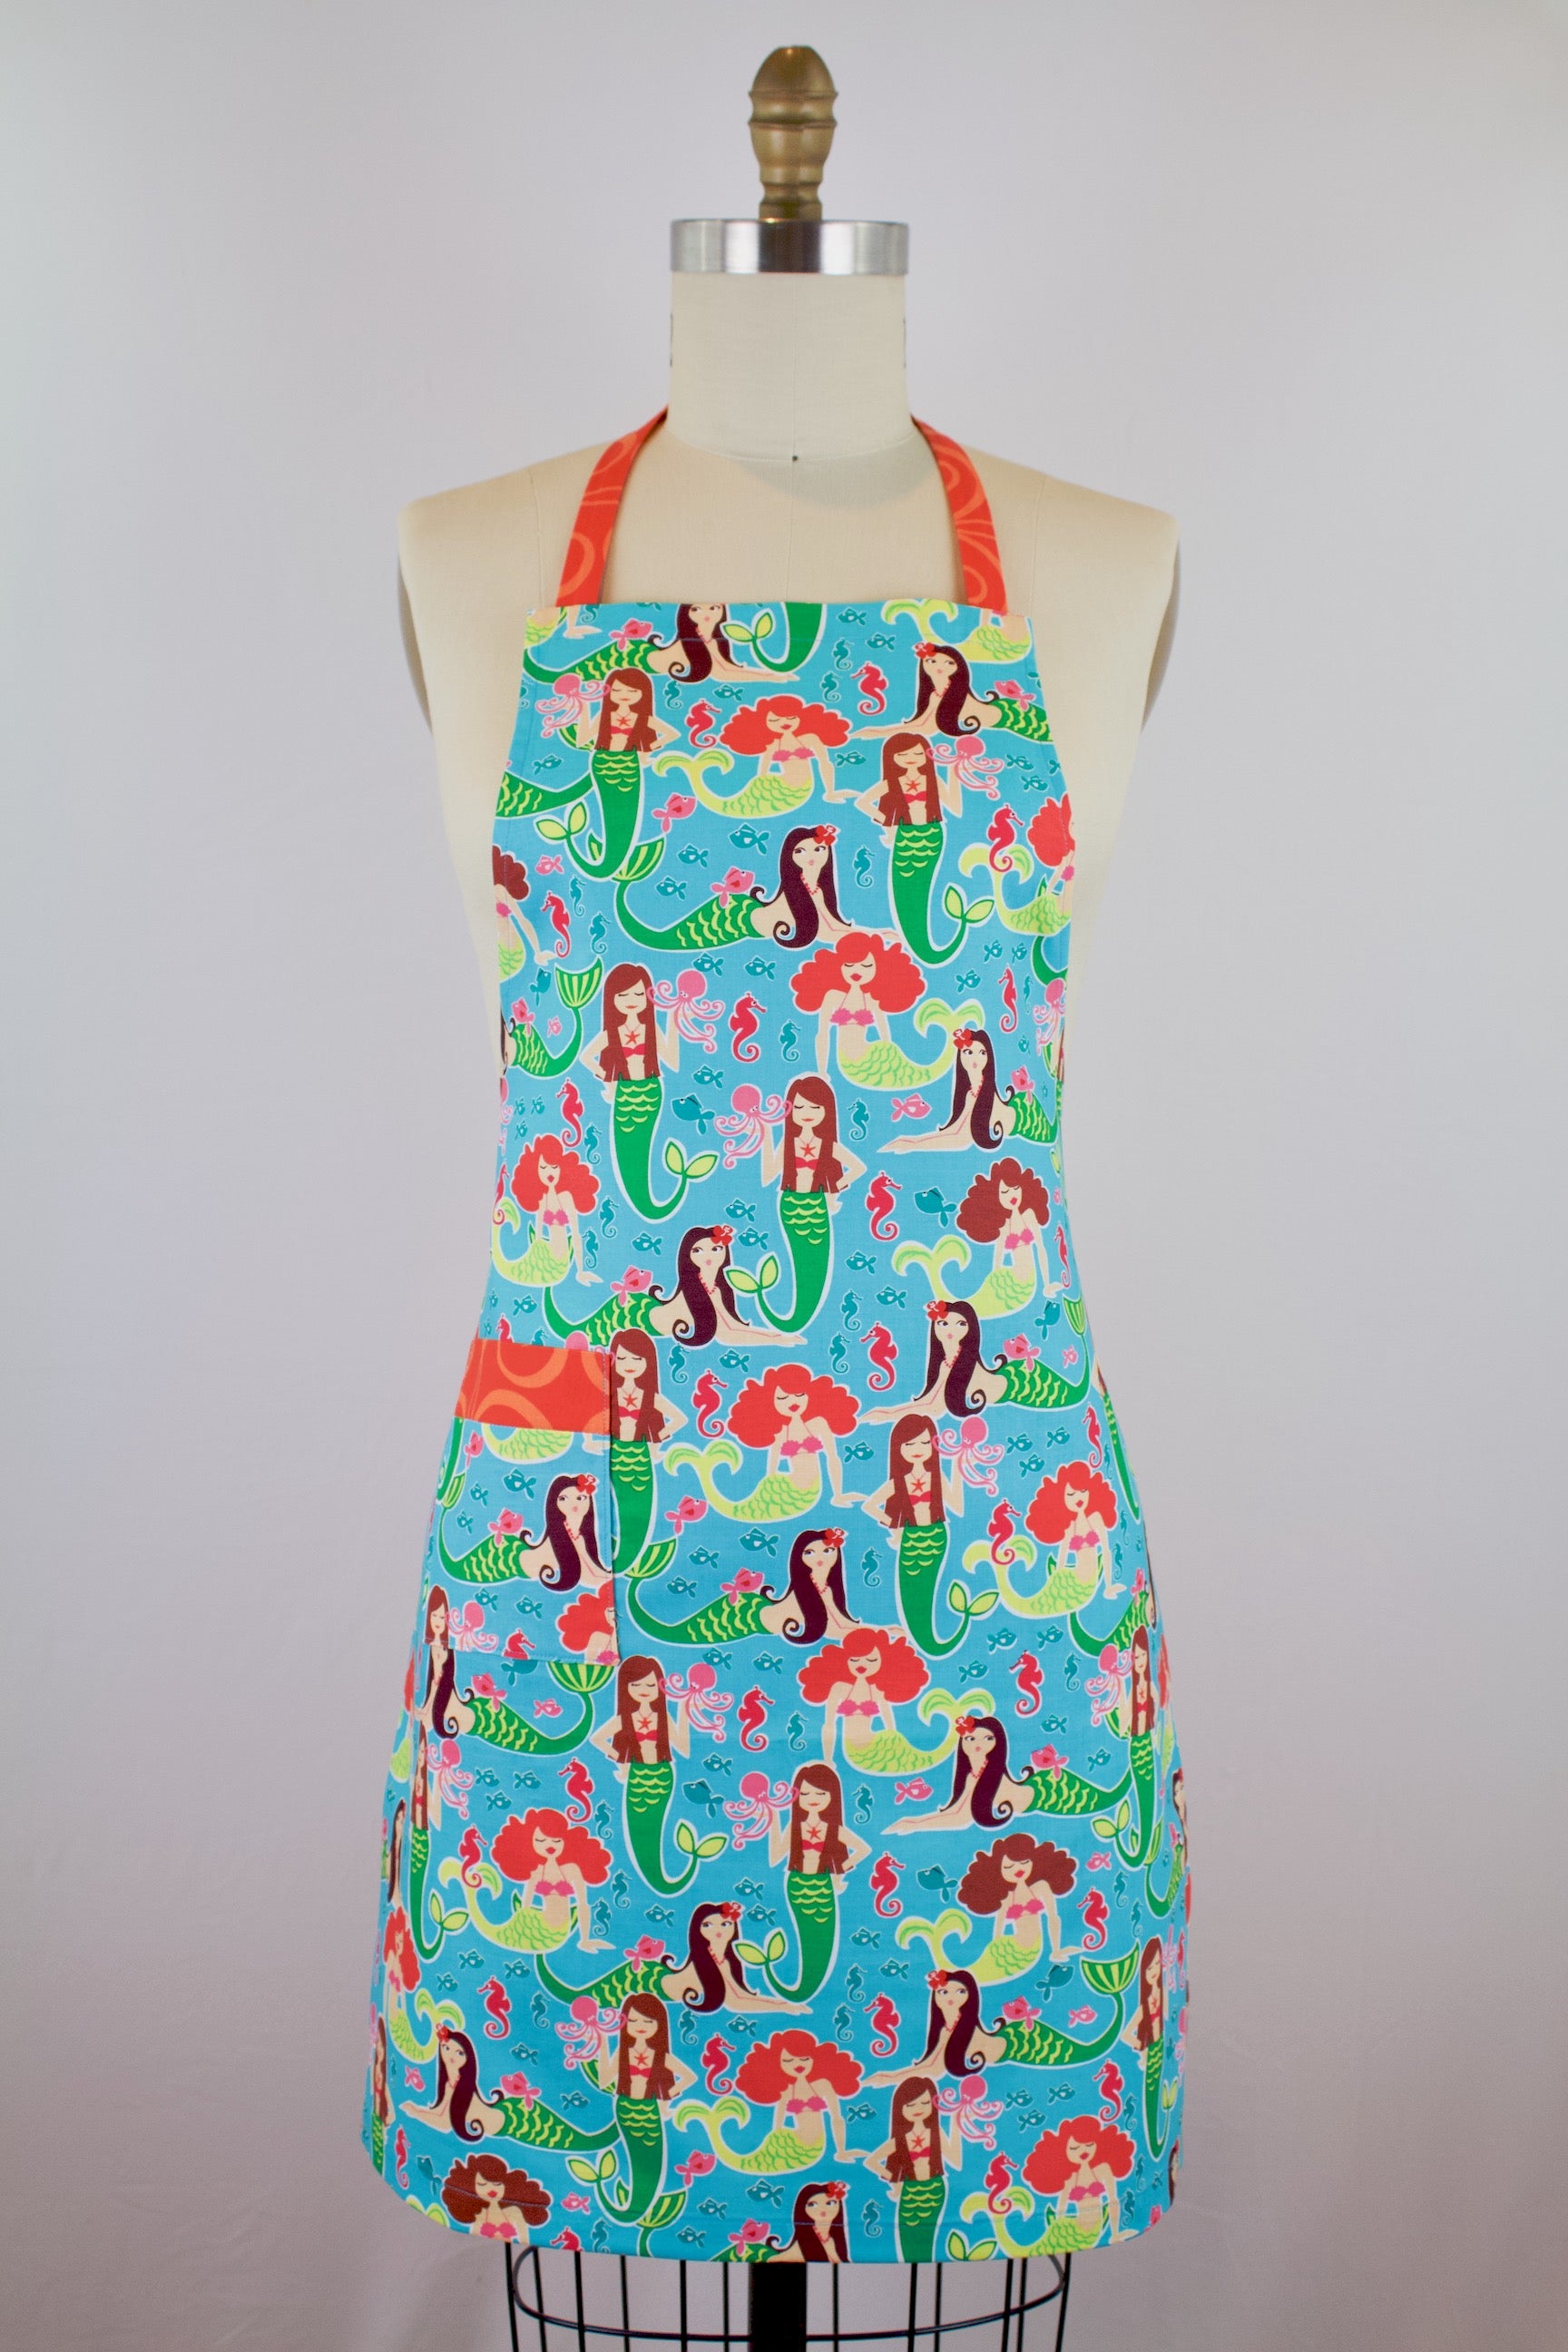 Mermaid Friends Apron-The Blue Peony-Age Group_Adult,Animal_Mermaid,Apron Style_Chef,Category_Apron,Color_Teal,Department_Kitchen,Material_Cotton,Theme_Water Life